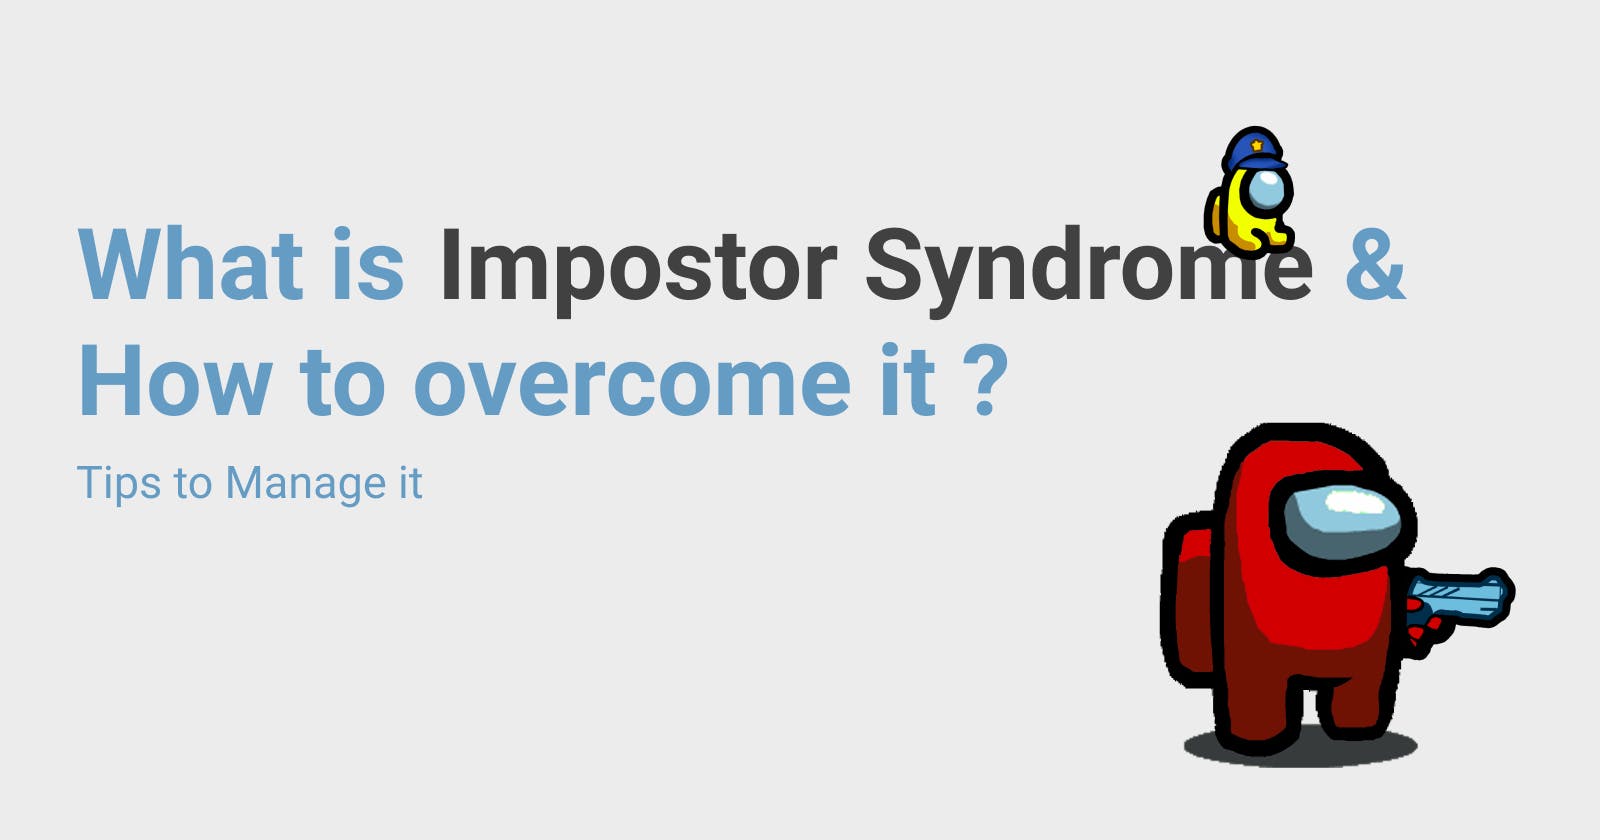 What is Impostor Syndrome & How to overcome it ?